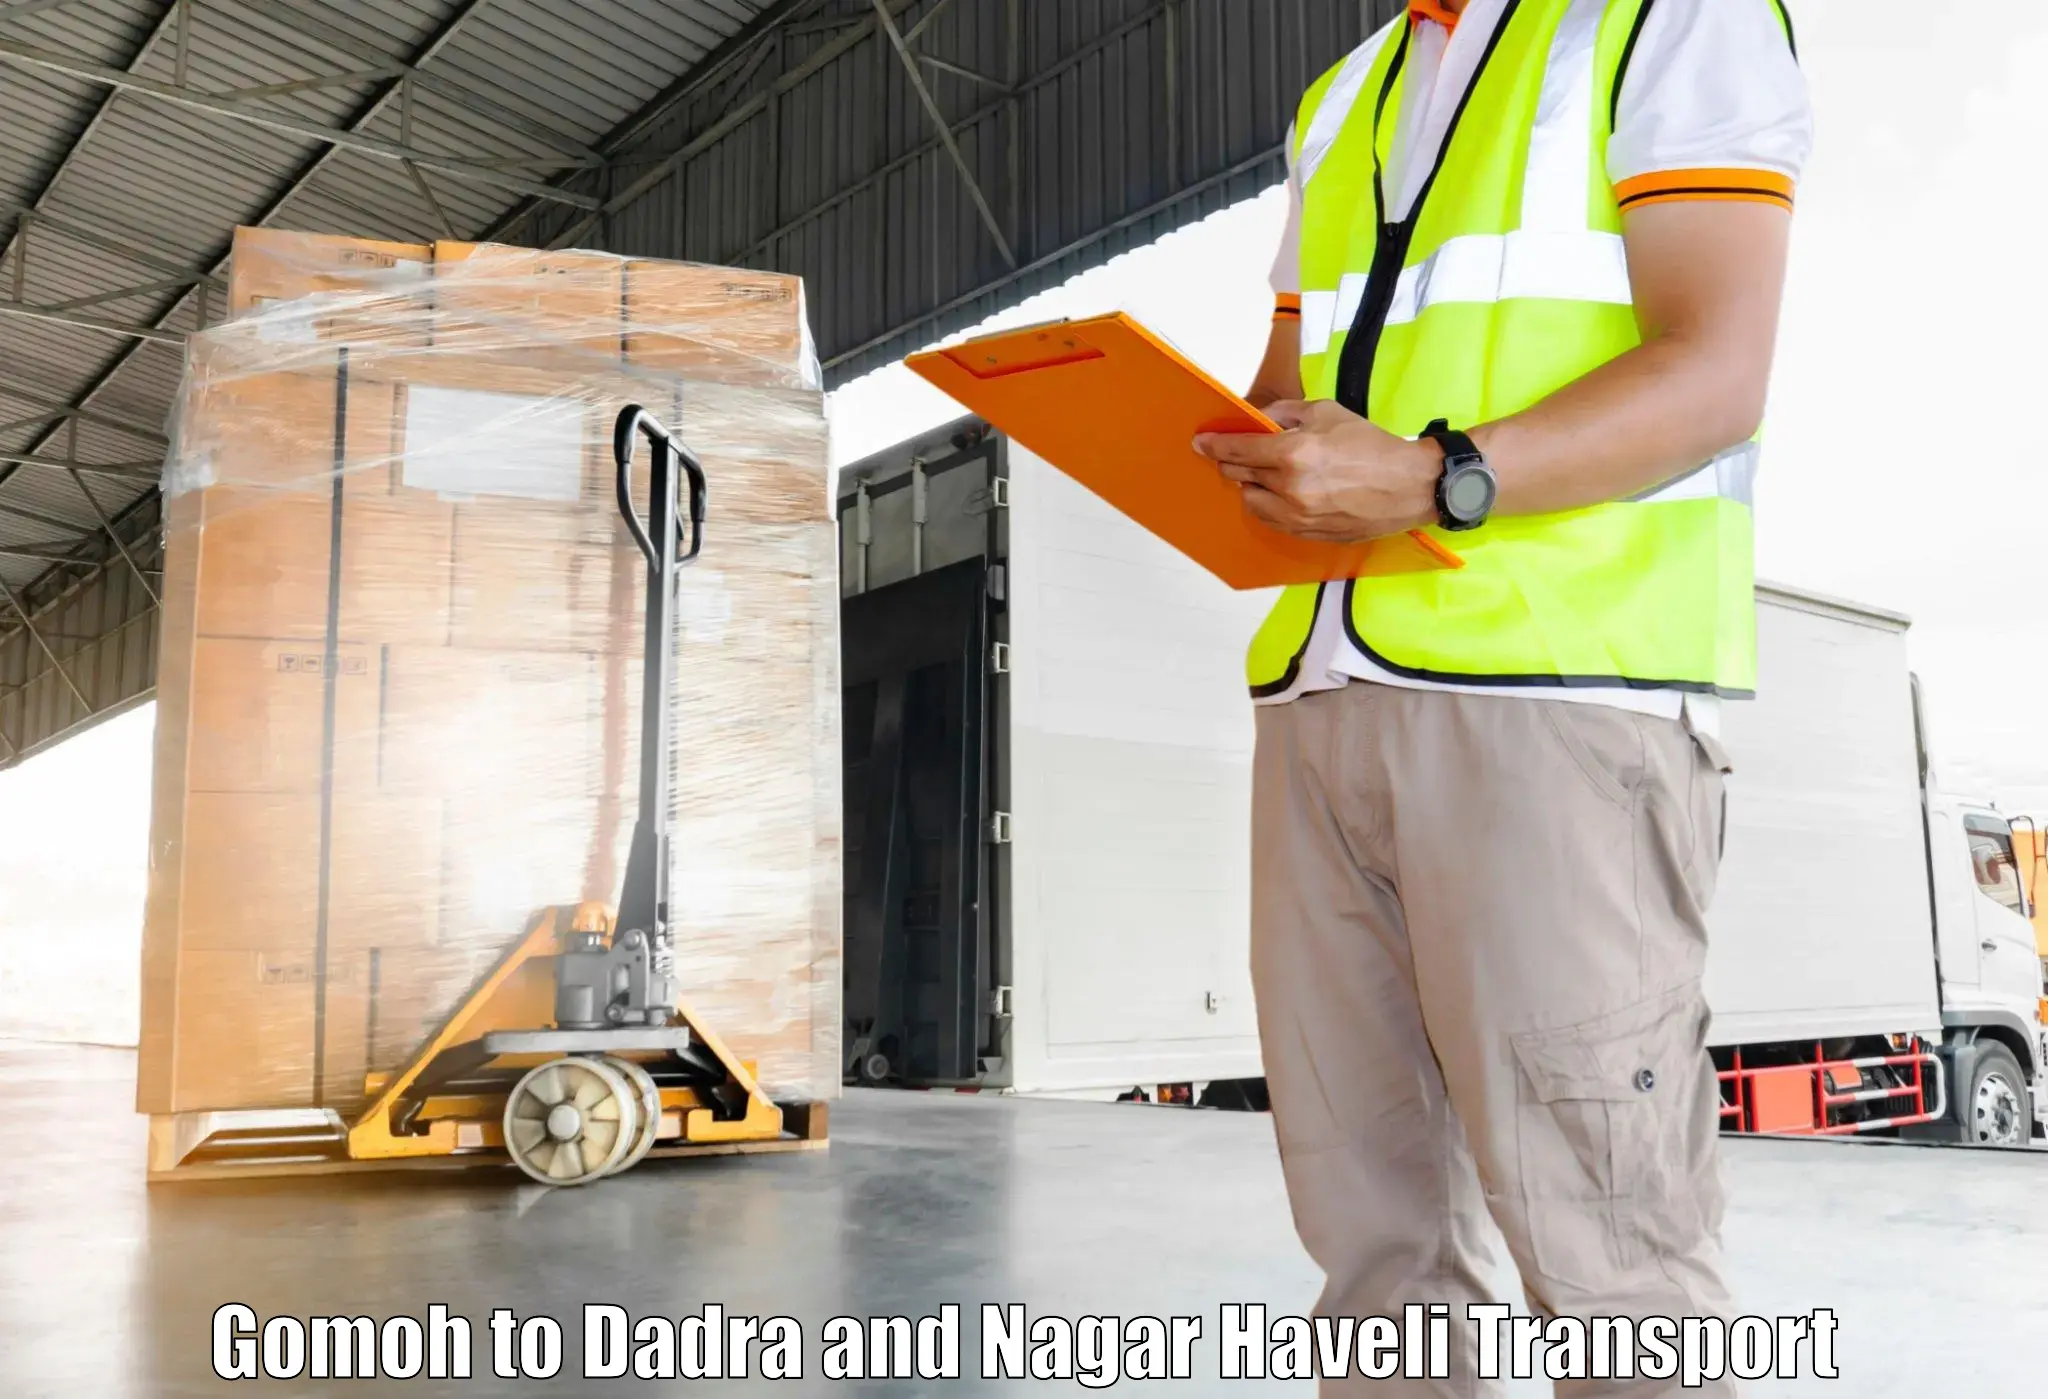 Commercial transport service Gomoh to Dadra and Nagar Haveli